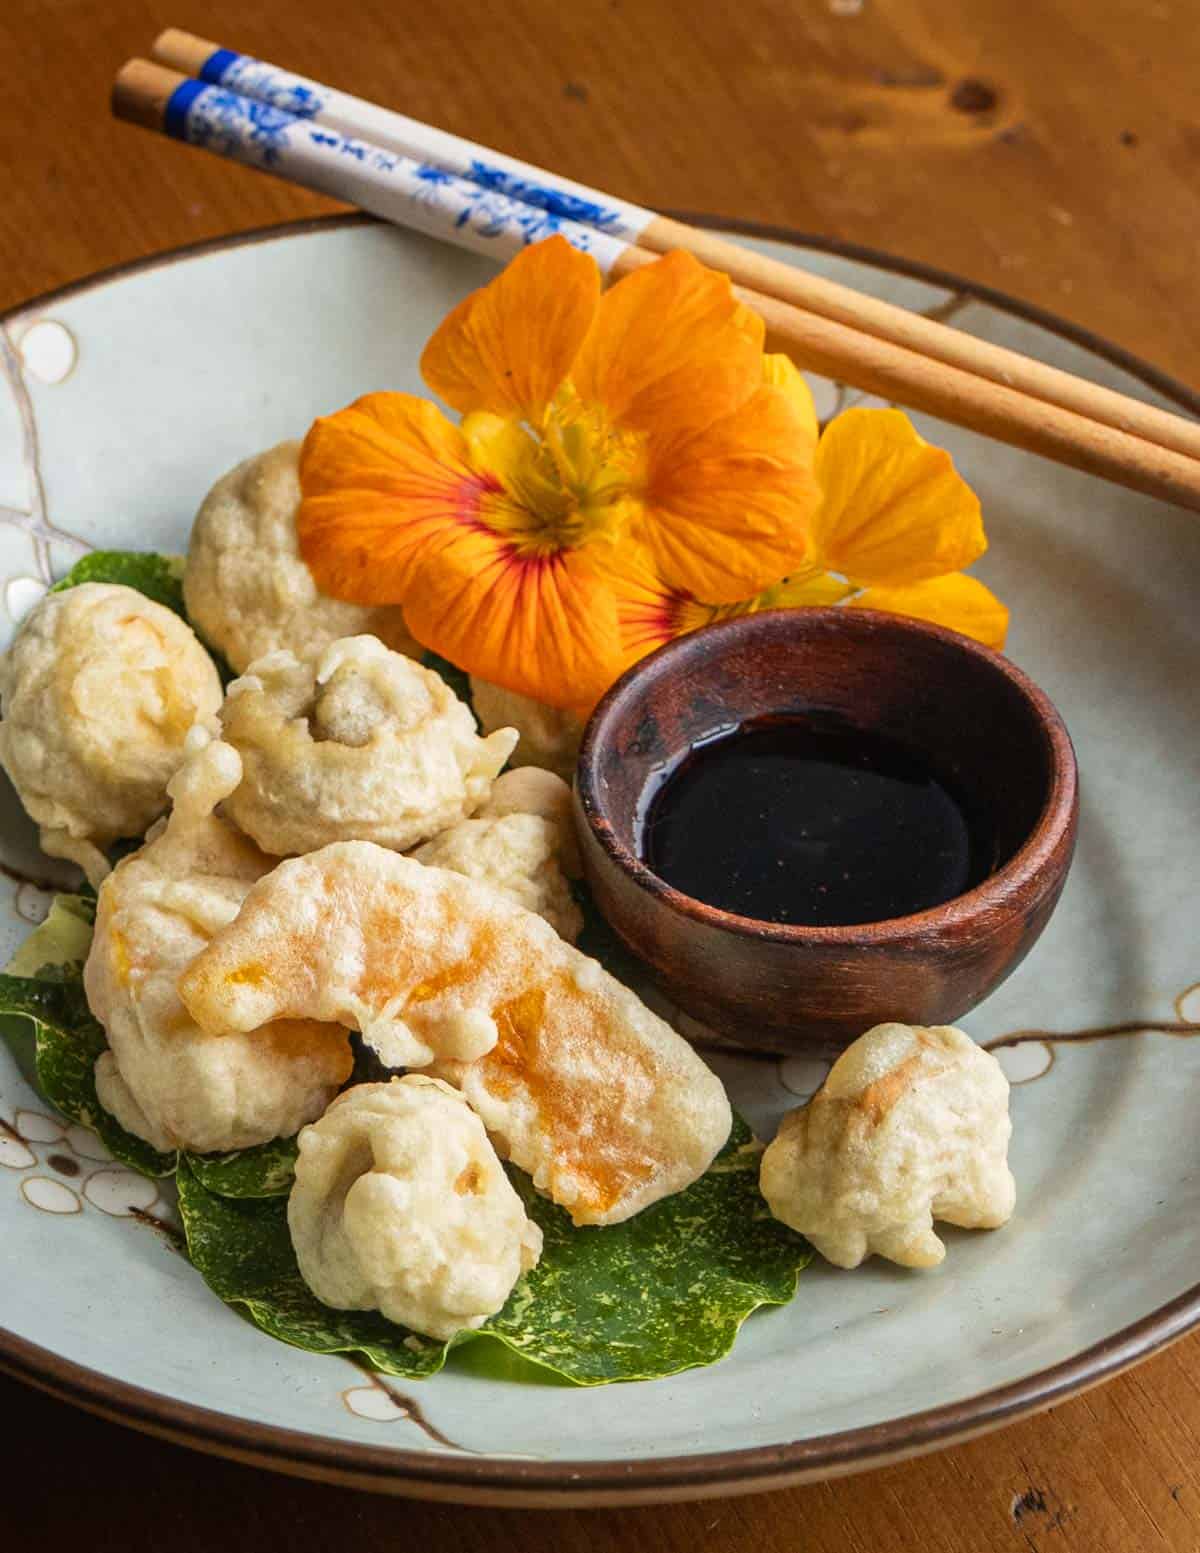 Tempura puffball mushrooms and kabocha squash on a plate next to a dipping sauce in a bowl with a plate garnished with nasturtium leaves. 